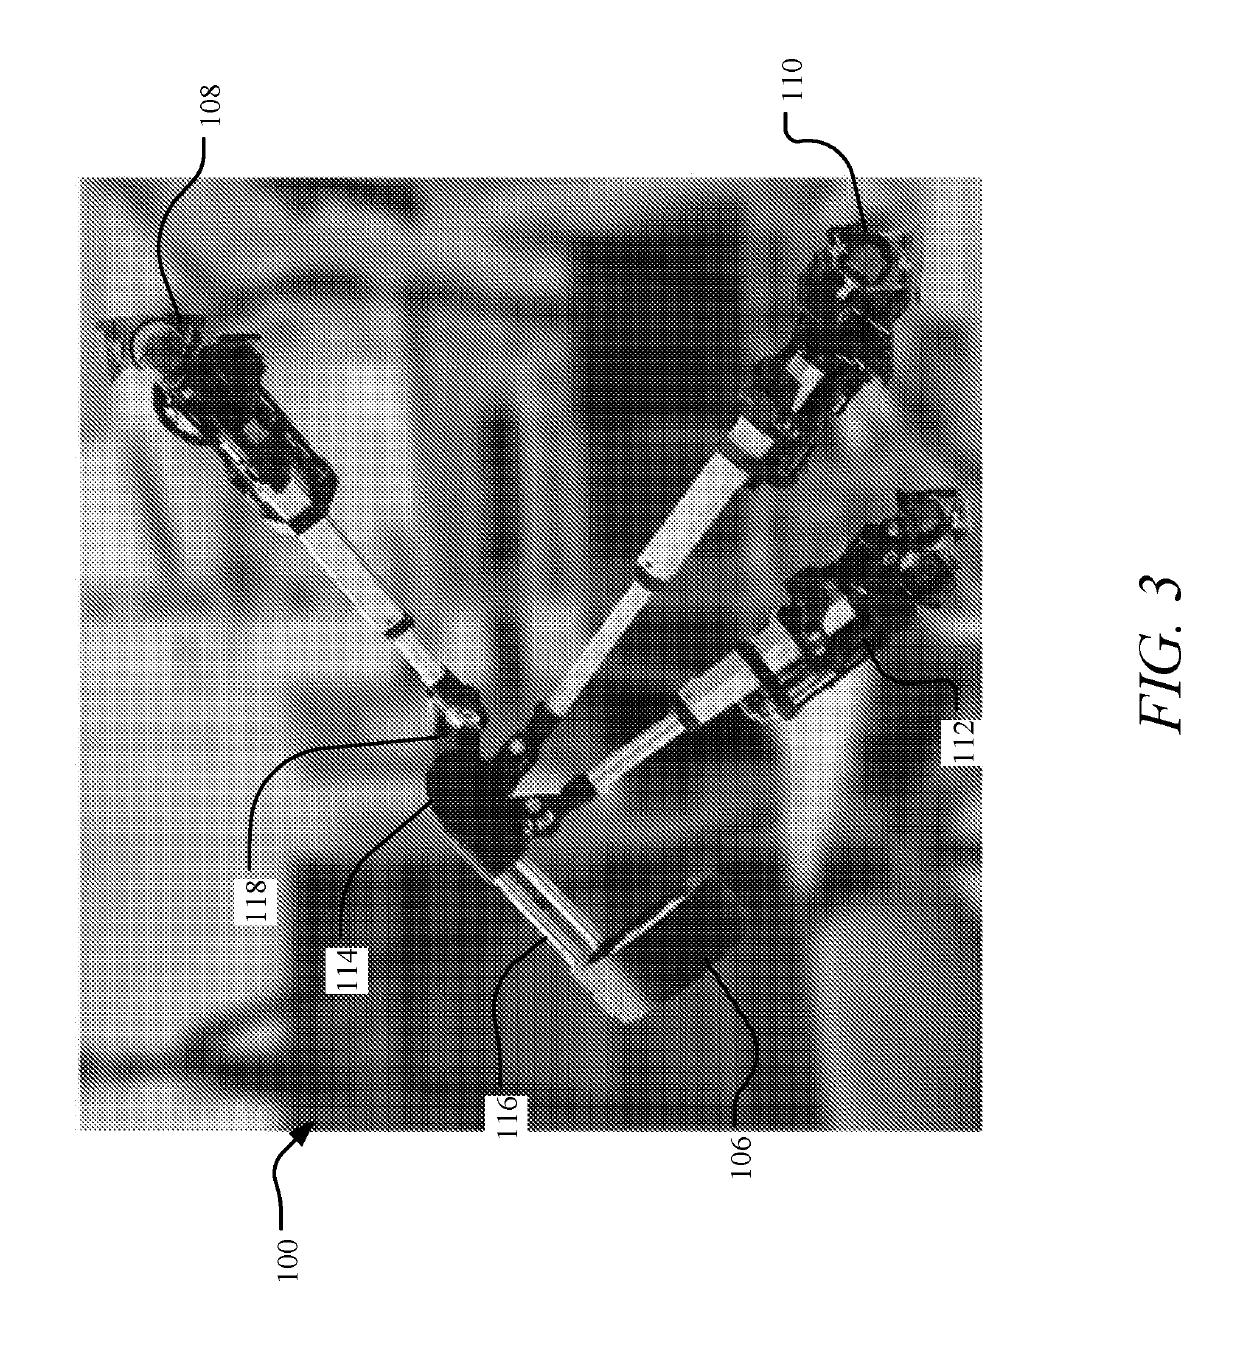 Mechanism for alleviating the effects of joint misalignment between users and wearable robots